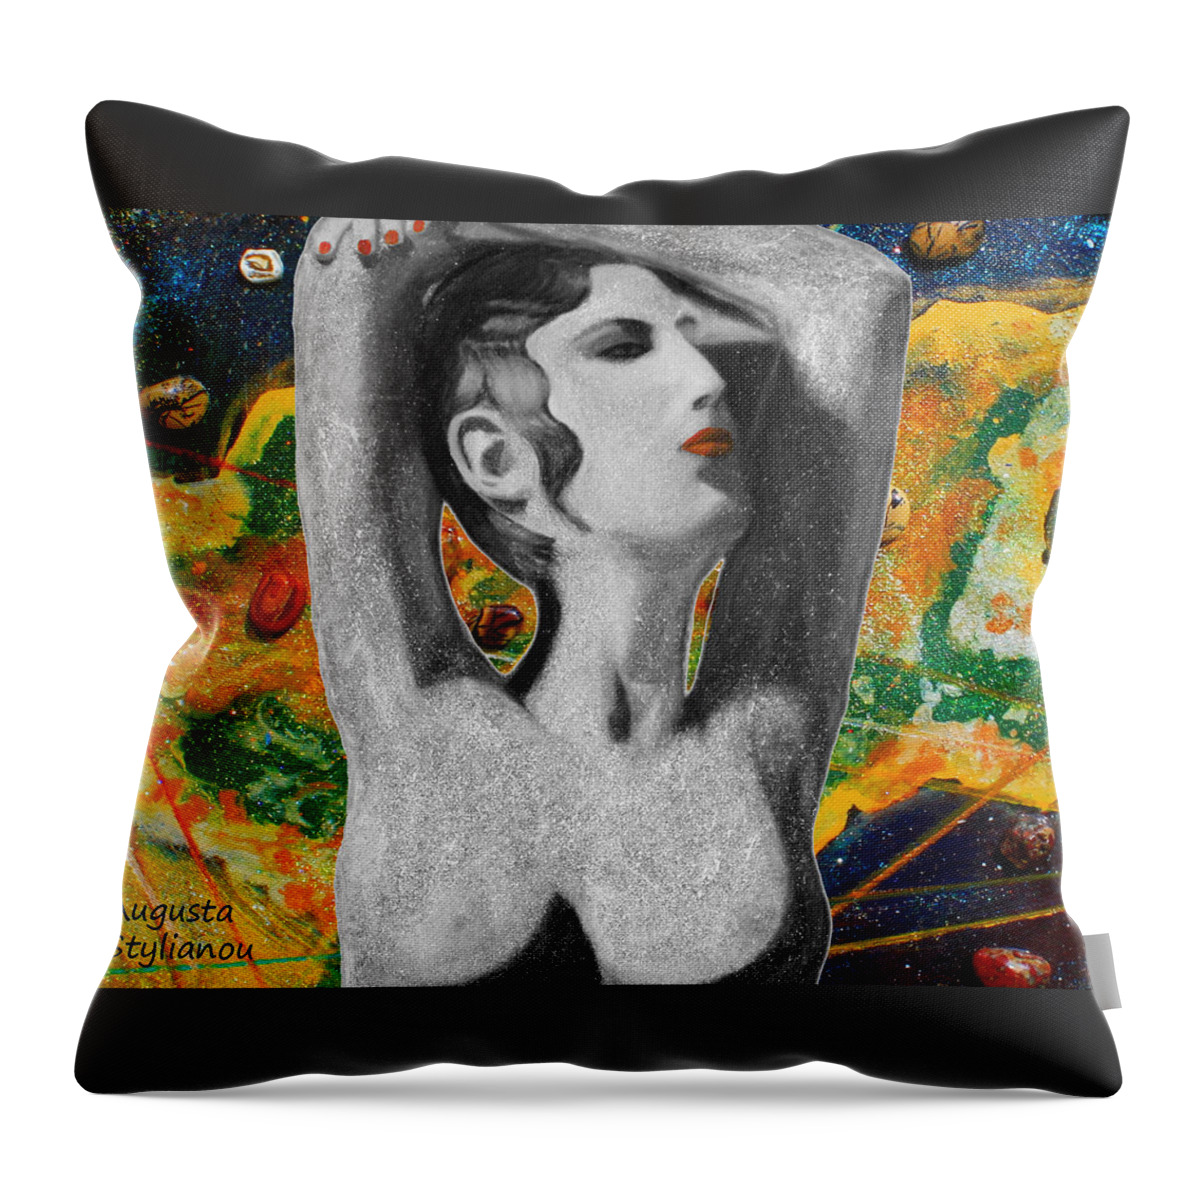 Augusta Stylianou Throw Pillow featuring the digital art Cyprus Map and Aphrodite #5 by Augusta Stylianou